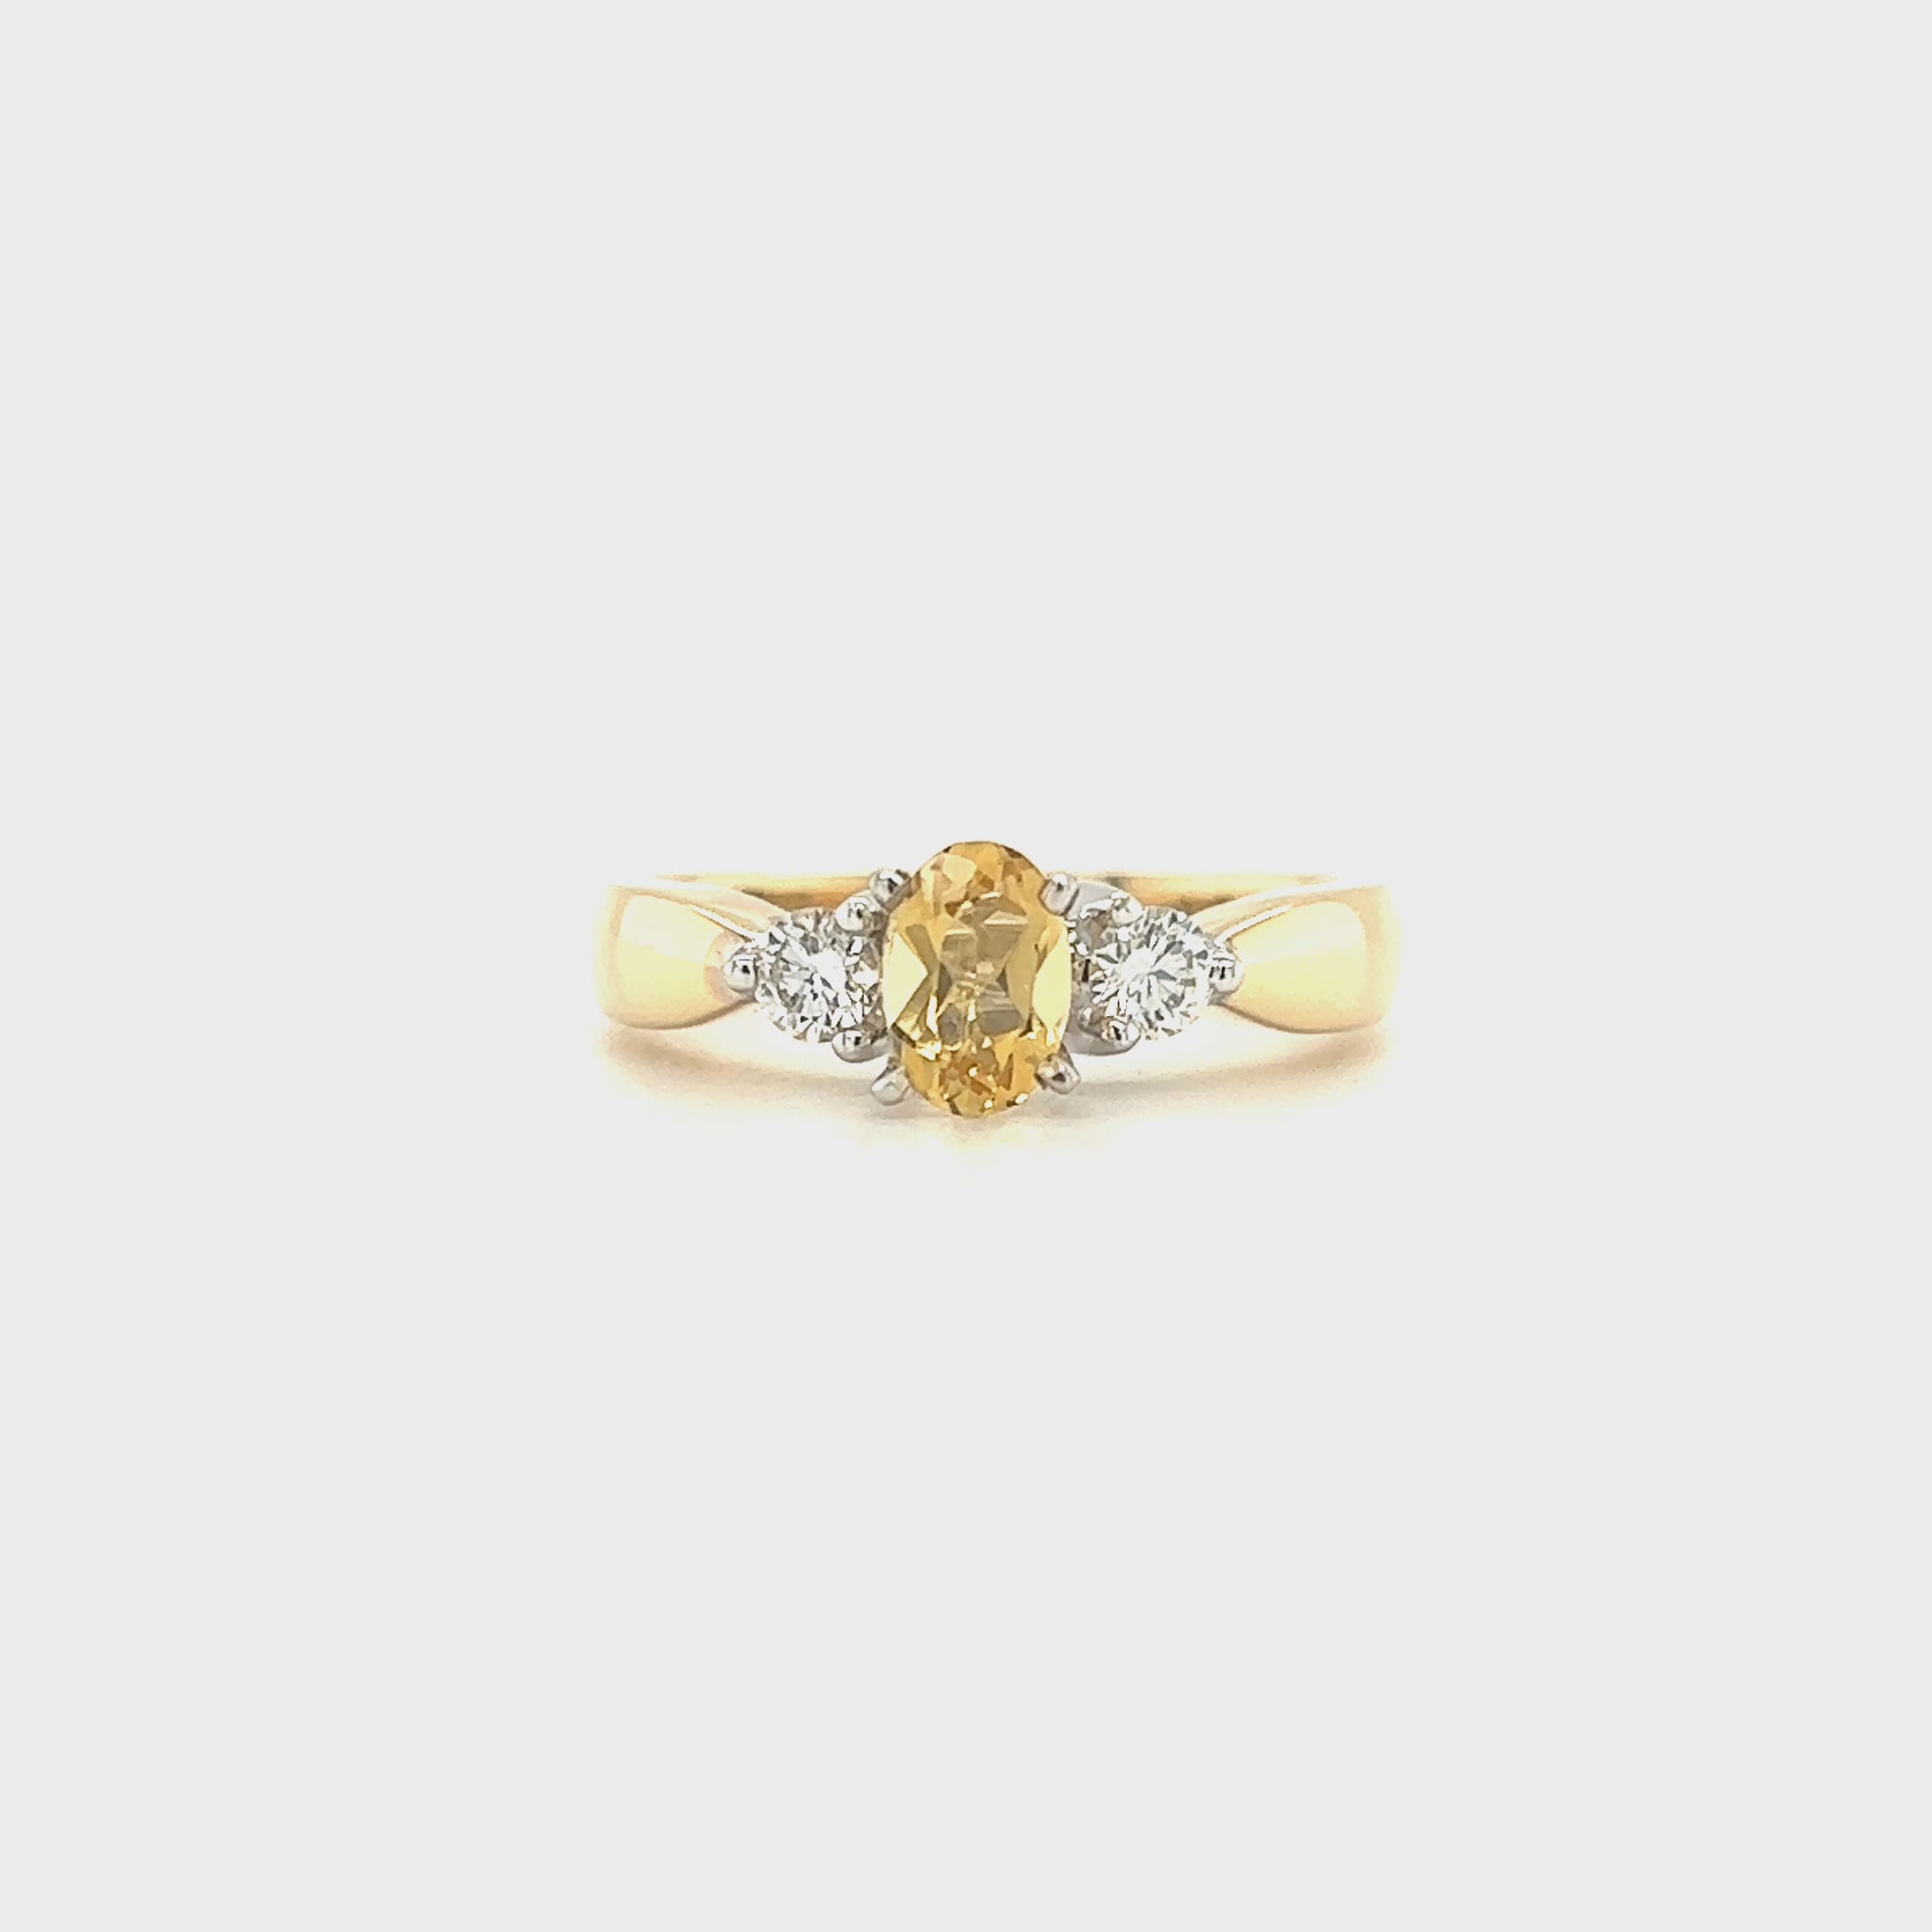 Precious Yellow Topaz Ring with Two Side Diamonds in 14K Yellow Gold Long Video